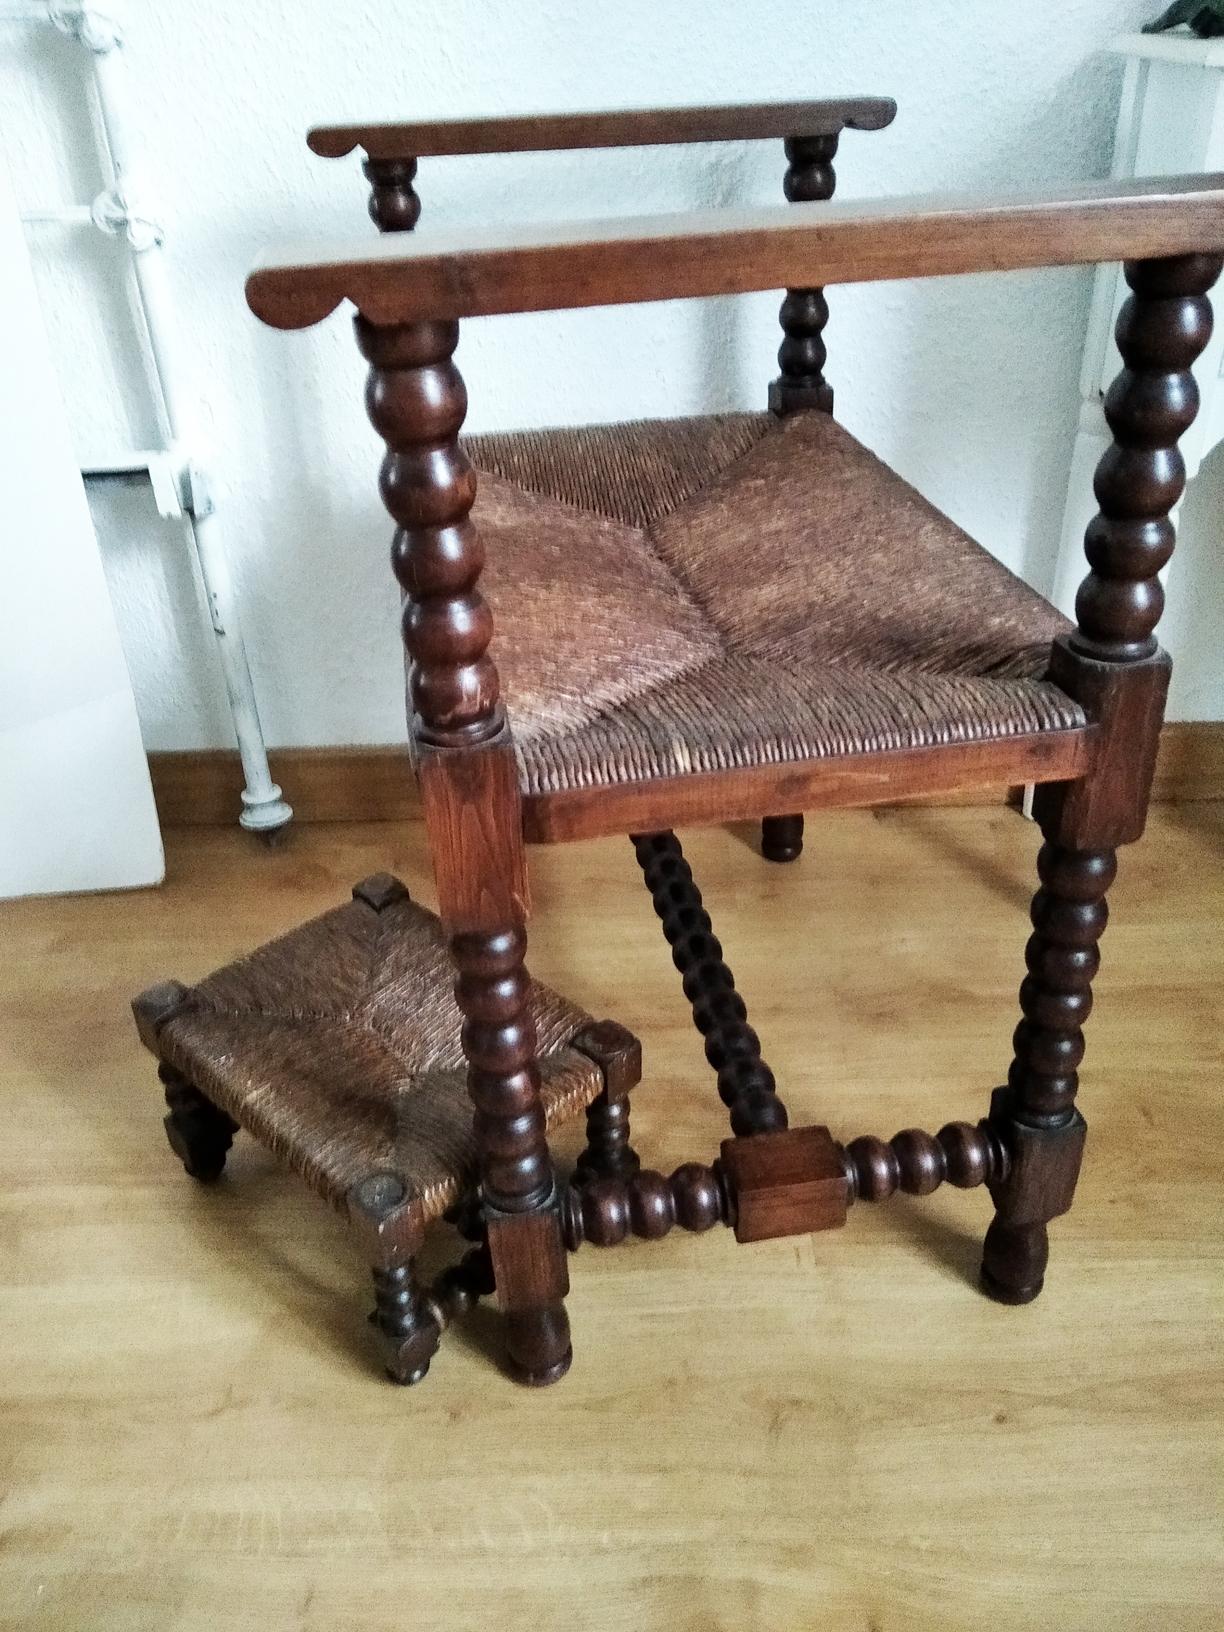 Renaissance Revival Stool  with Footstools Turned Legs and Natural Fiber Seat